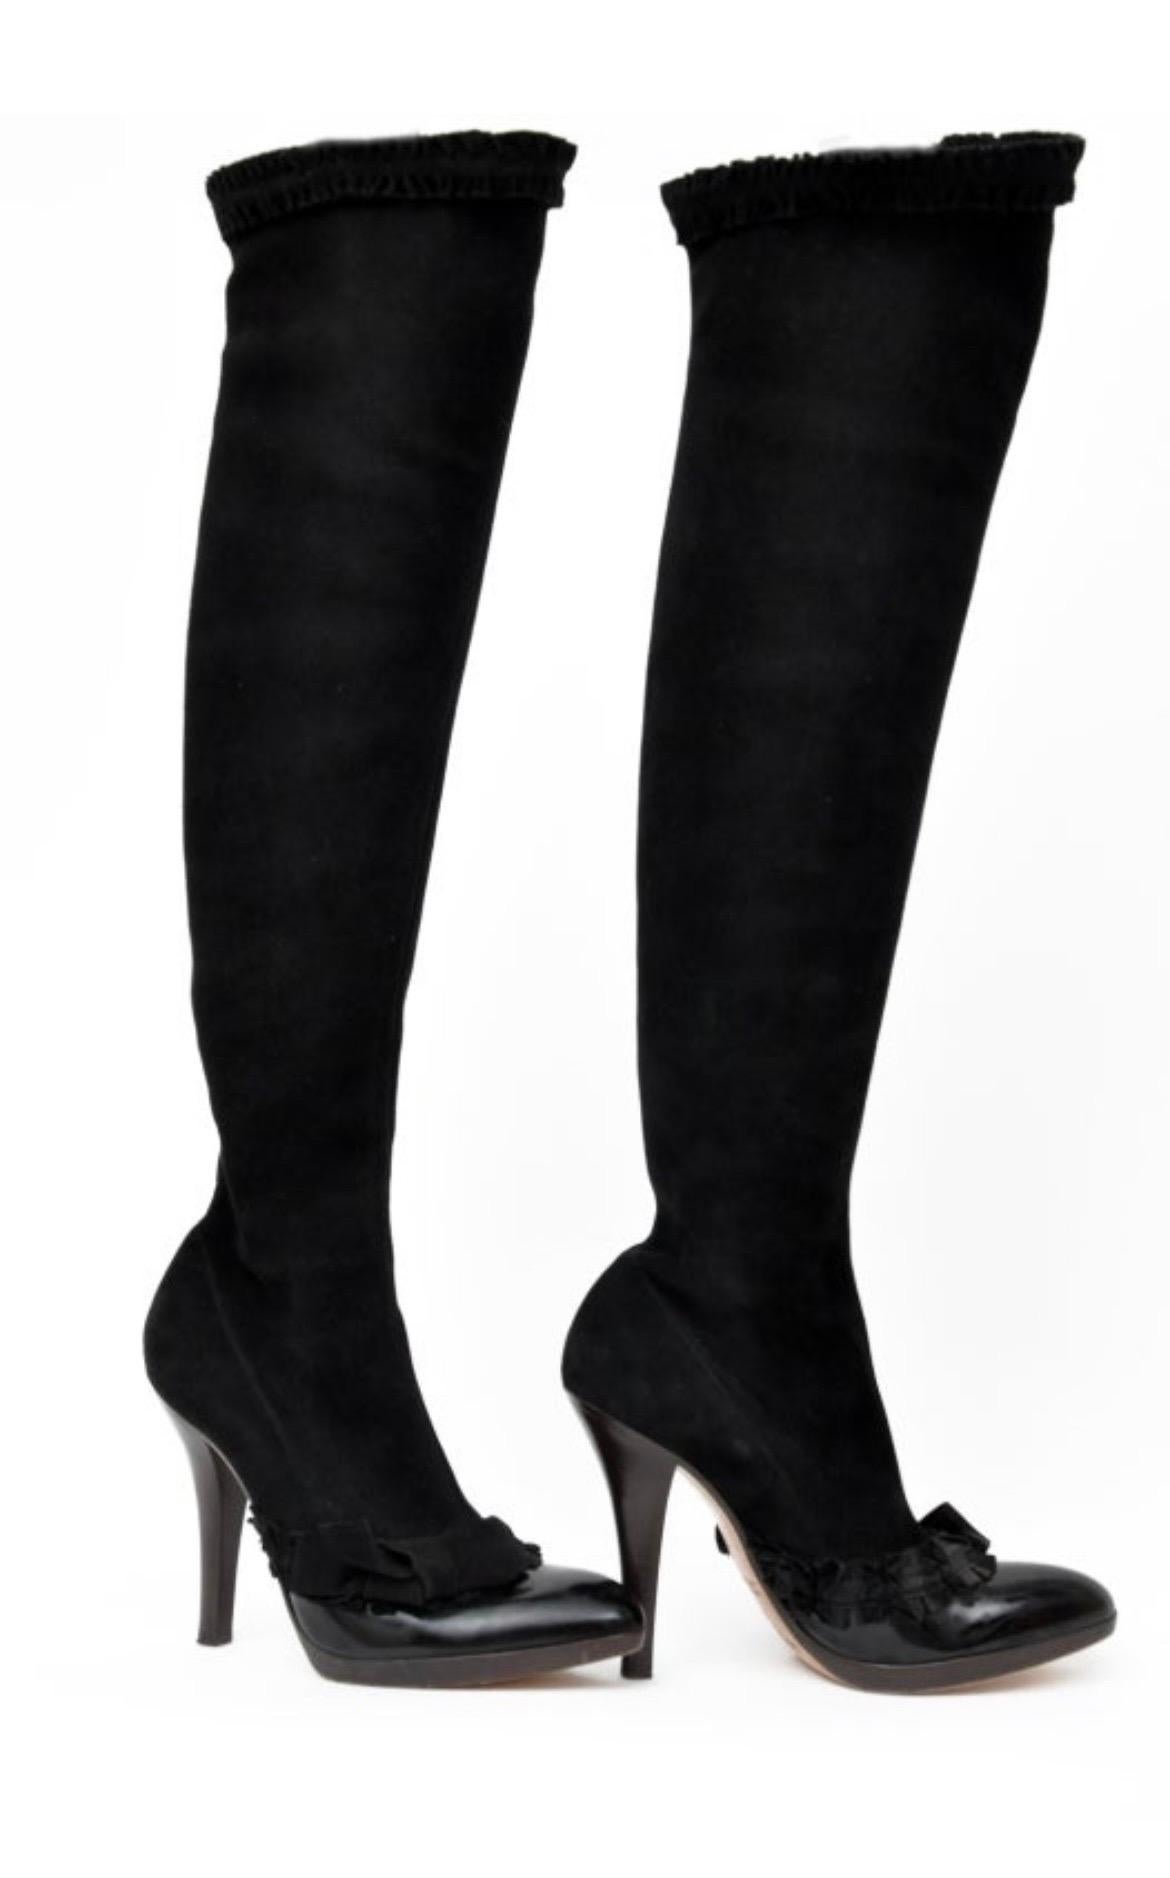 A/W 2001 Tom Ford for Yves Saint Laurent Black Over the Knee Boots
One of the most recognized boots ever created by Tom Ford!
Stretch Suede
Color: Black
Leather lining and sole
Ribbons
4